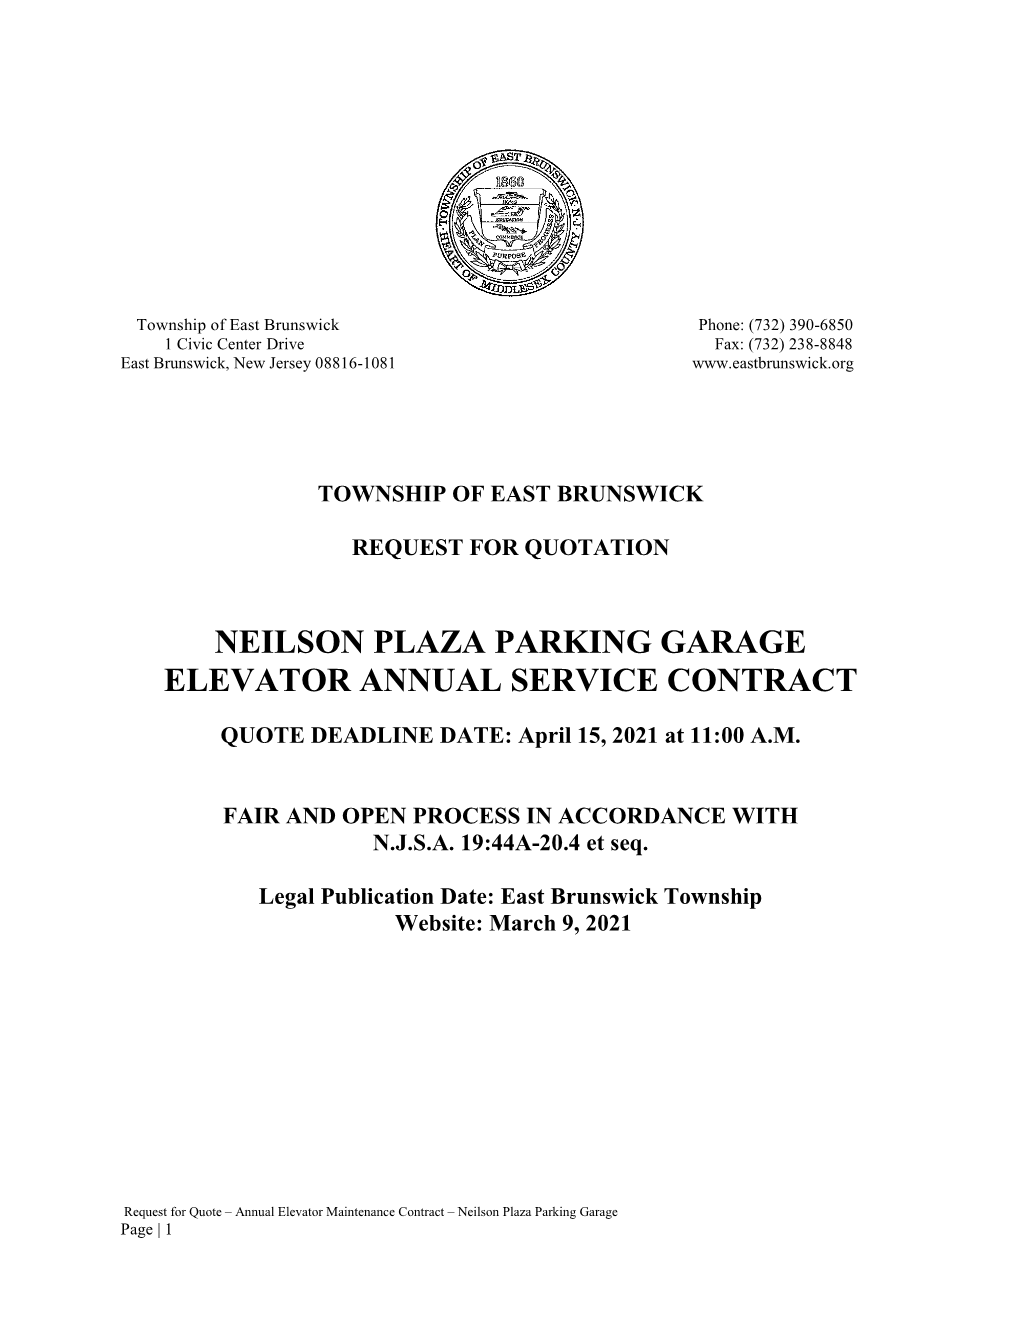 Neilson Plaza Parking Garage Elevator Annual Service Contract